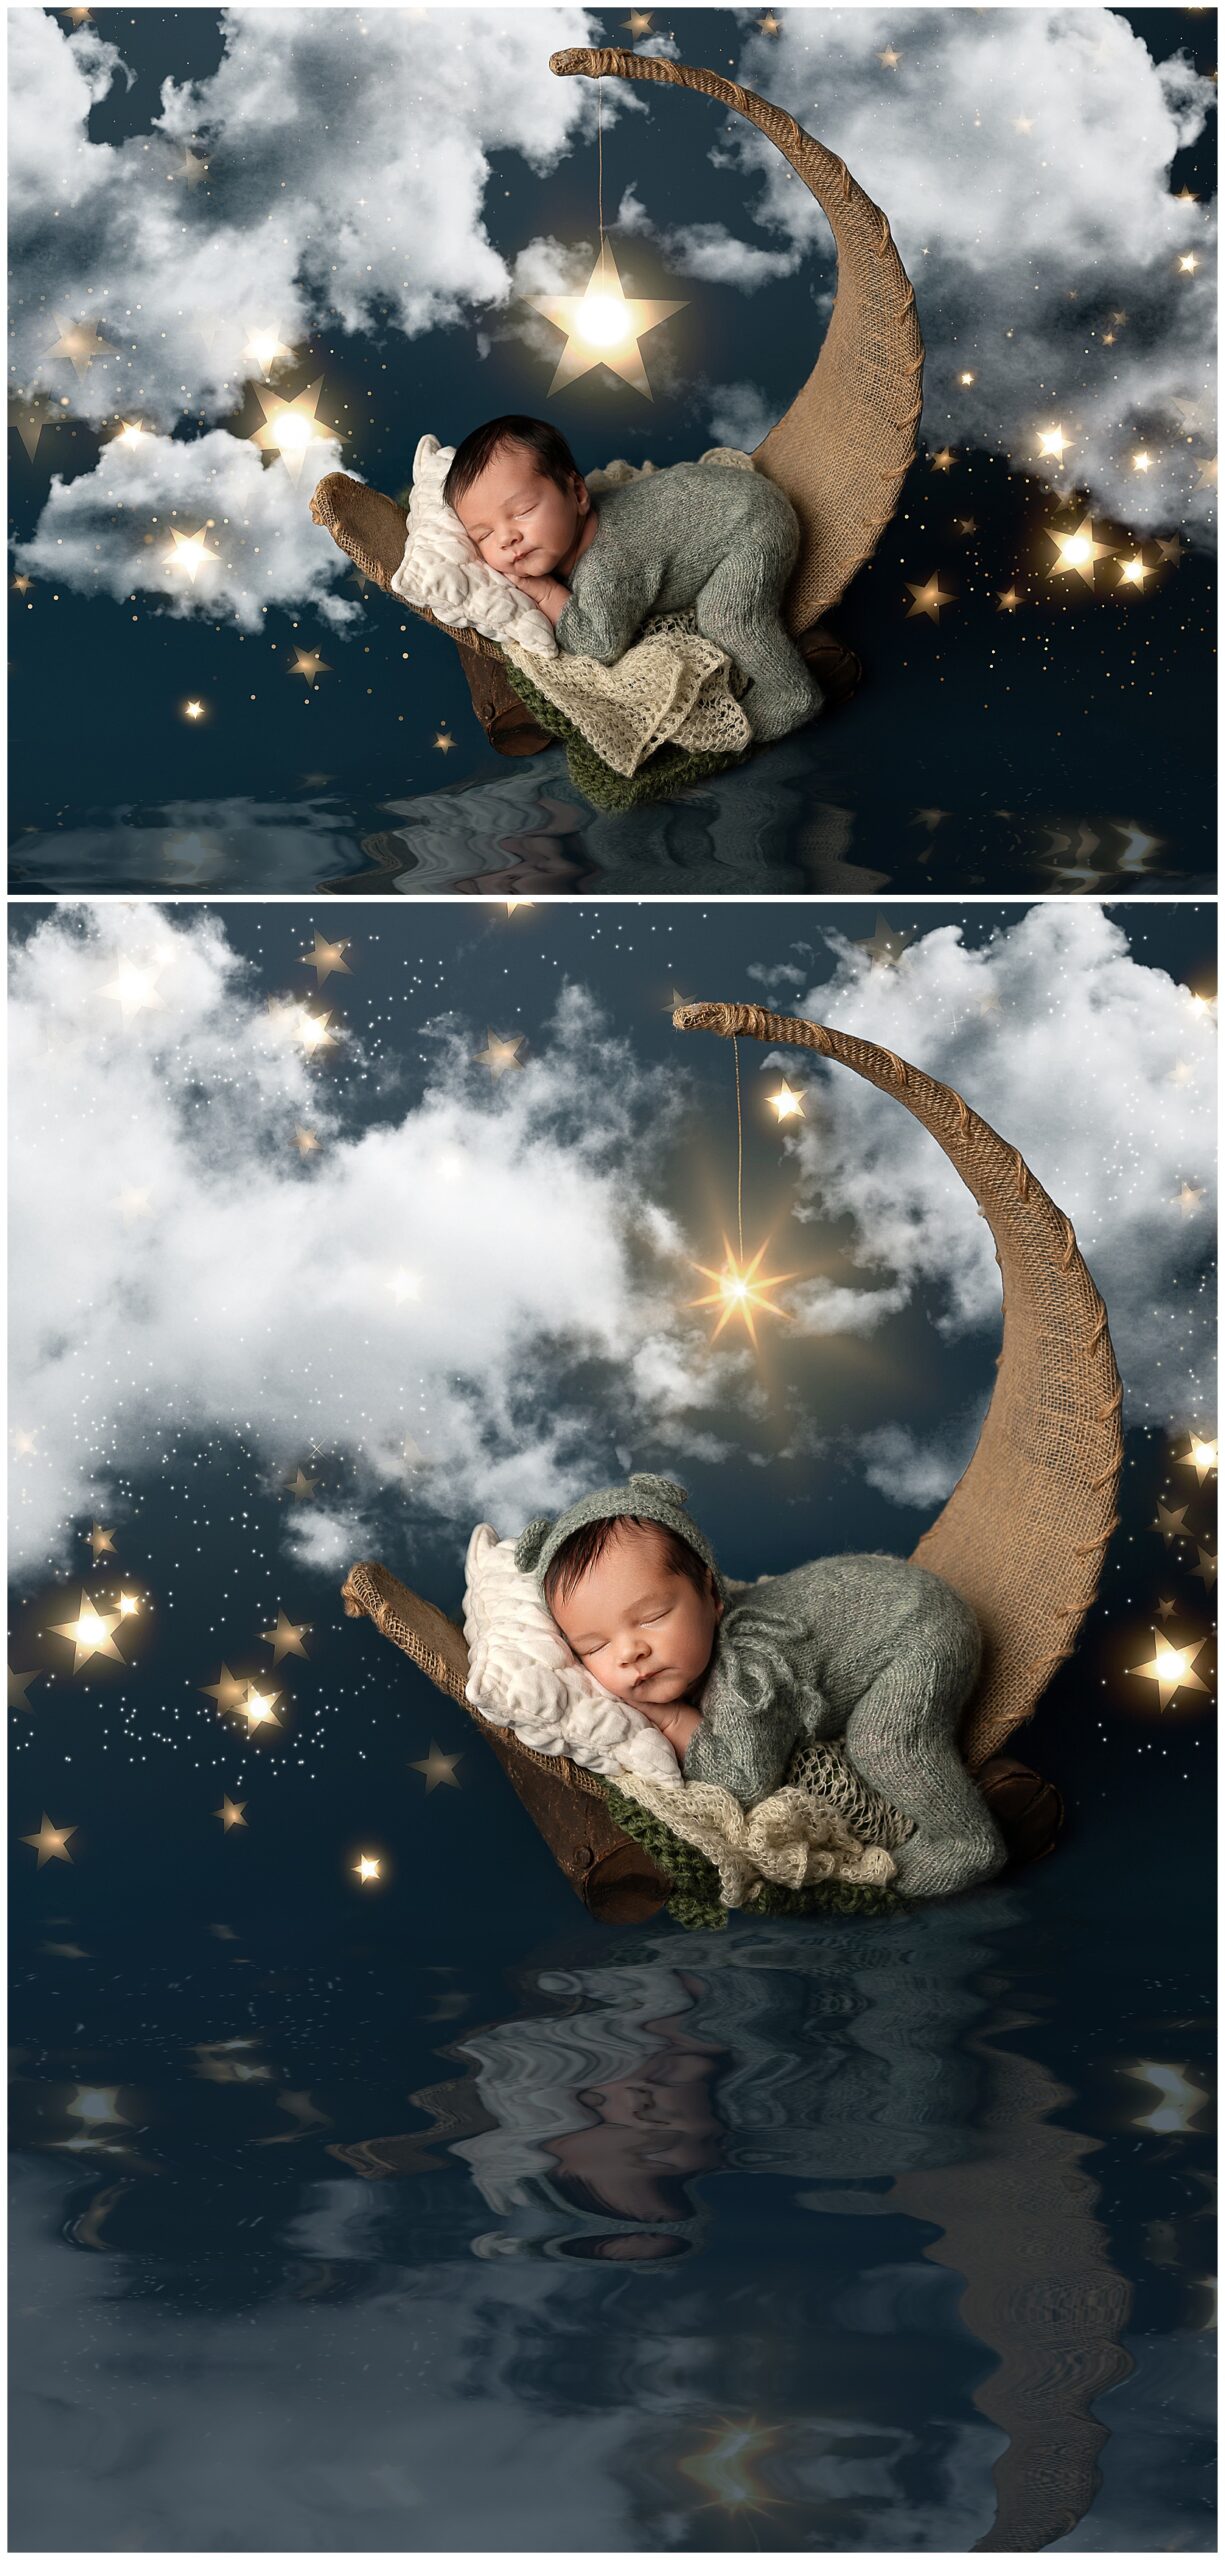 Two images of a newborn with complex newborn photography props, including a jute moon bed, blanket, and background featuring stars, clouds, and a water reflection.